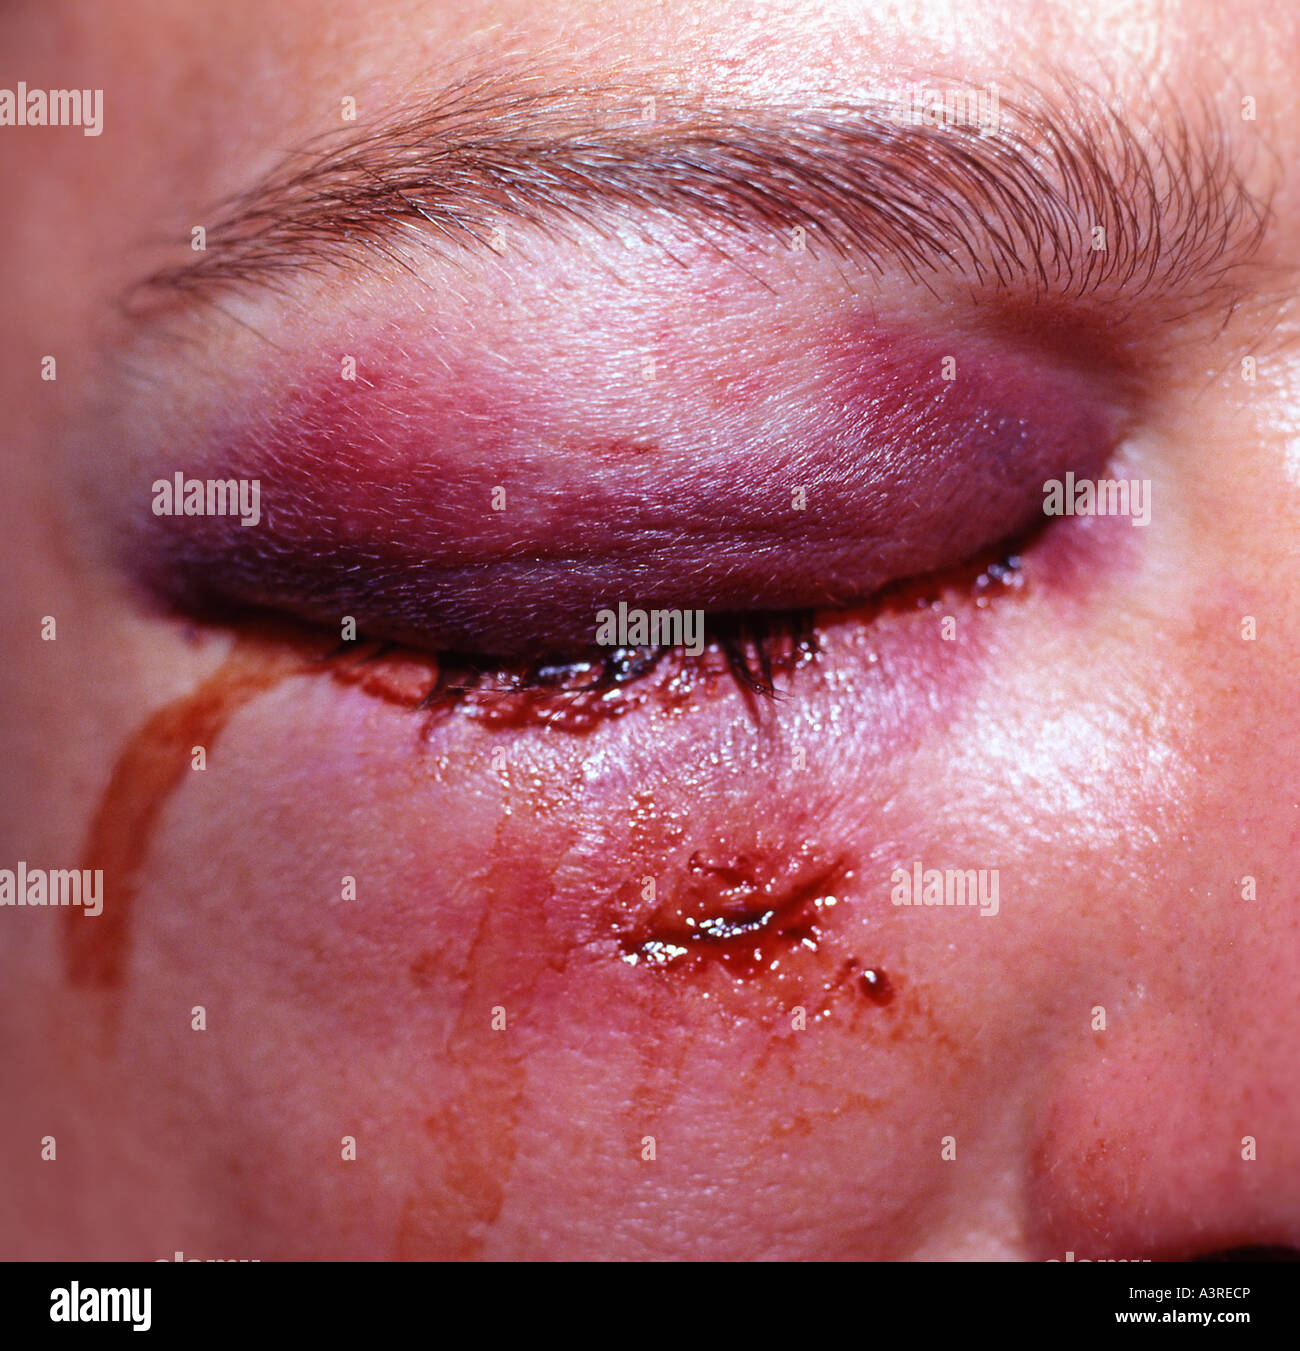 Black eye. Picture by Paddy McGuinness paddymcguinness. Stock Photo